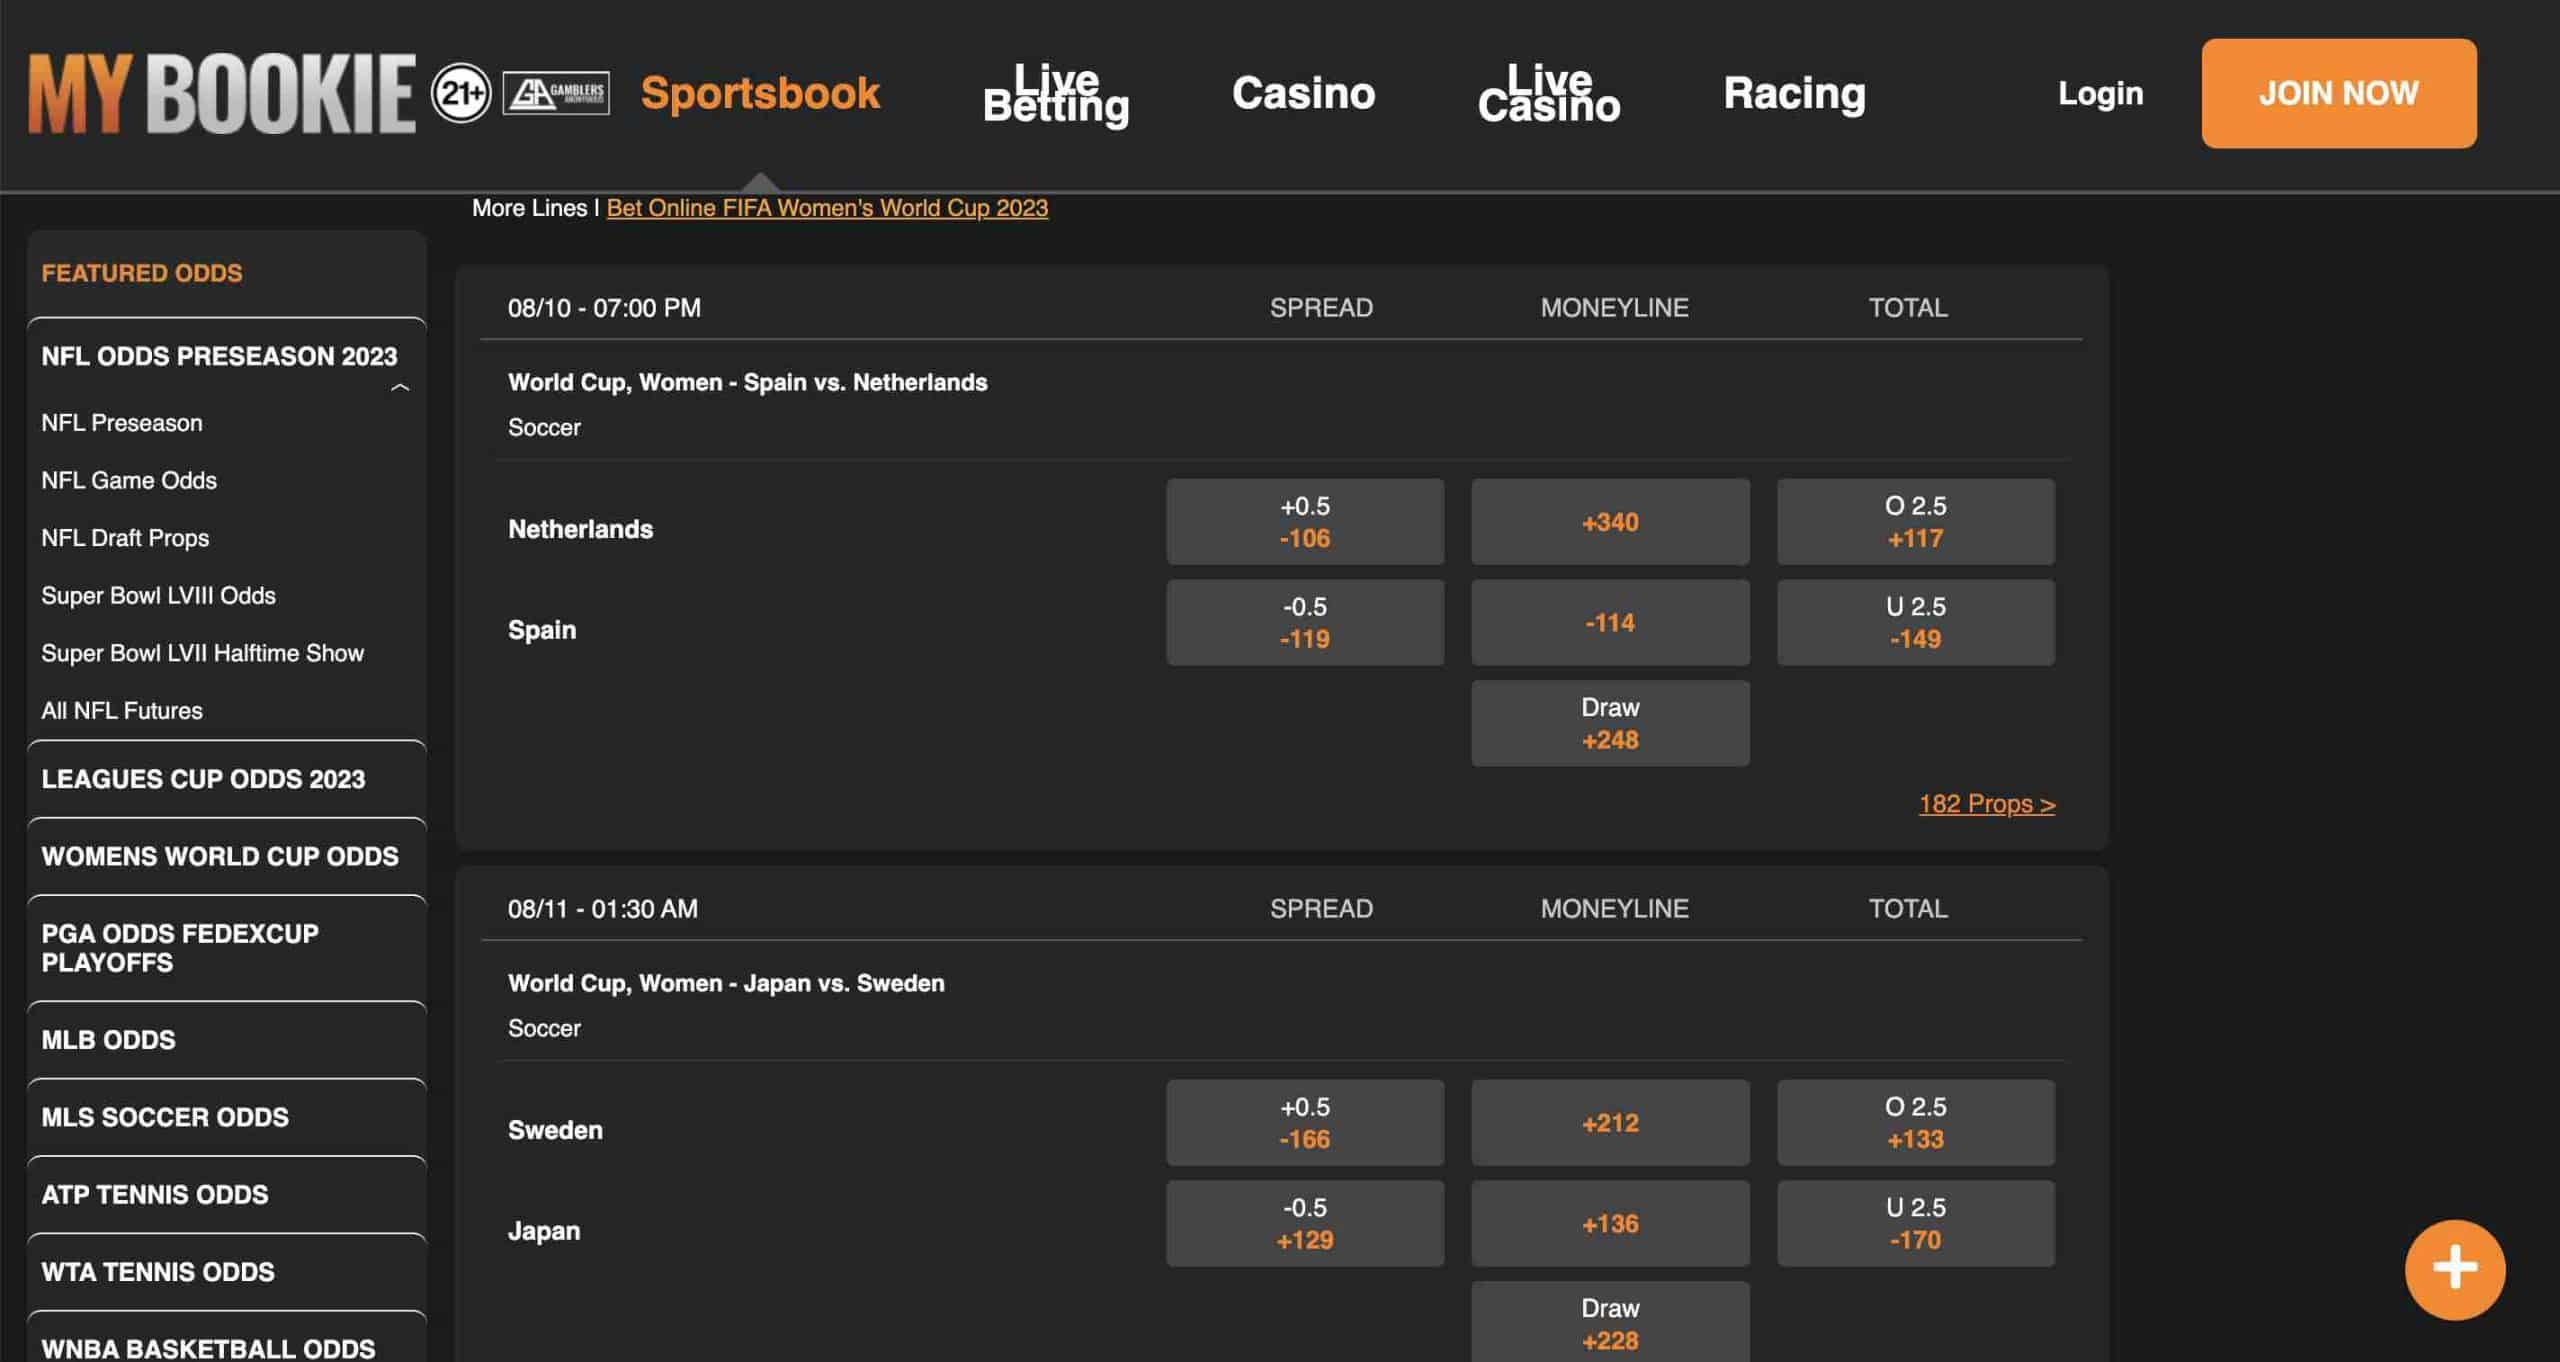 A screenshot of the odds for the main markets on two Women's World Cup matches in the American format